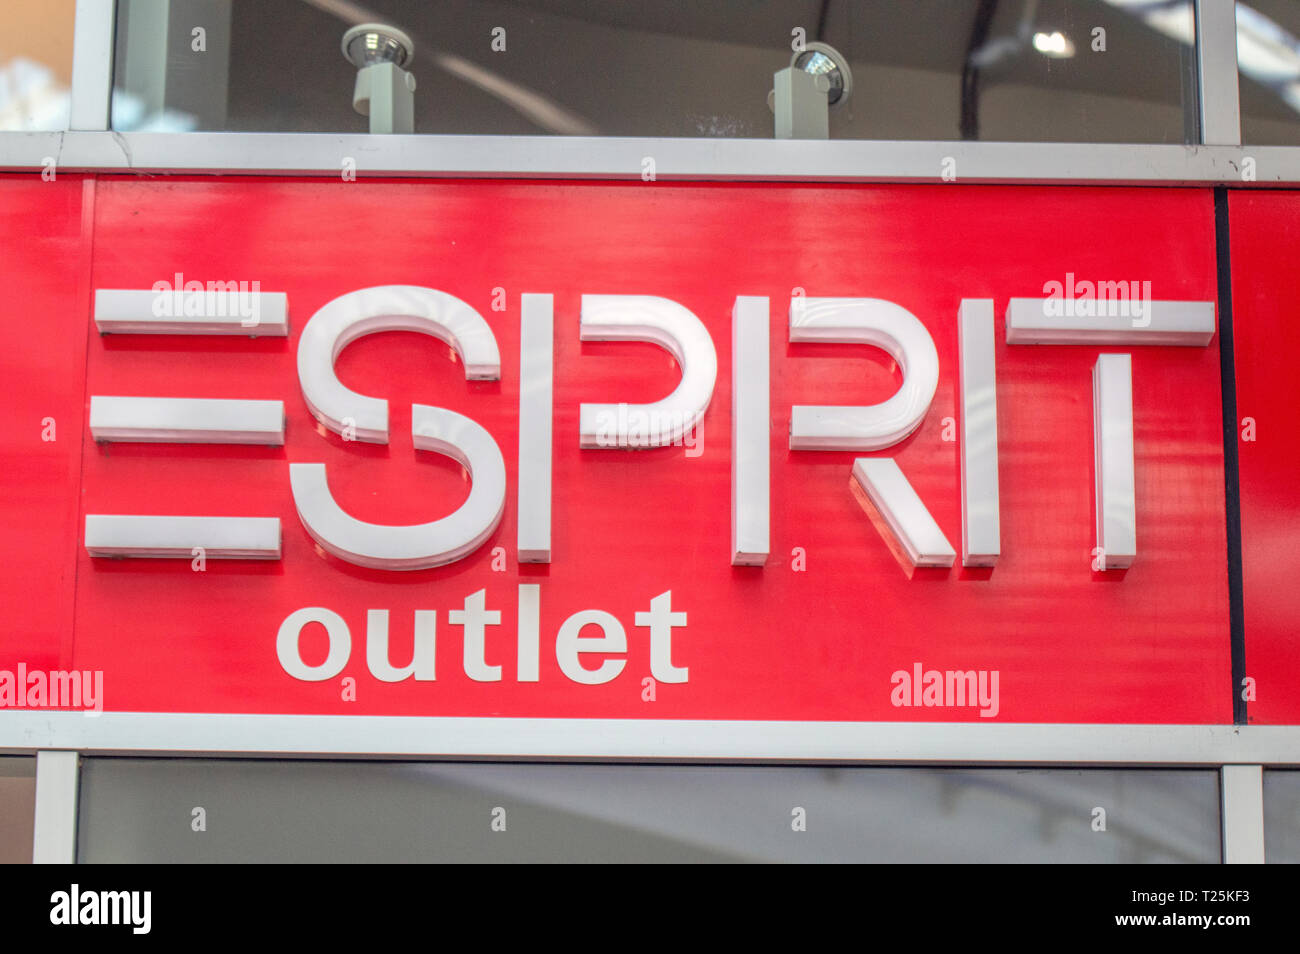 Esprit shop hi-res stock photography and images - Alamy